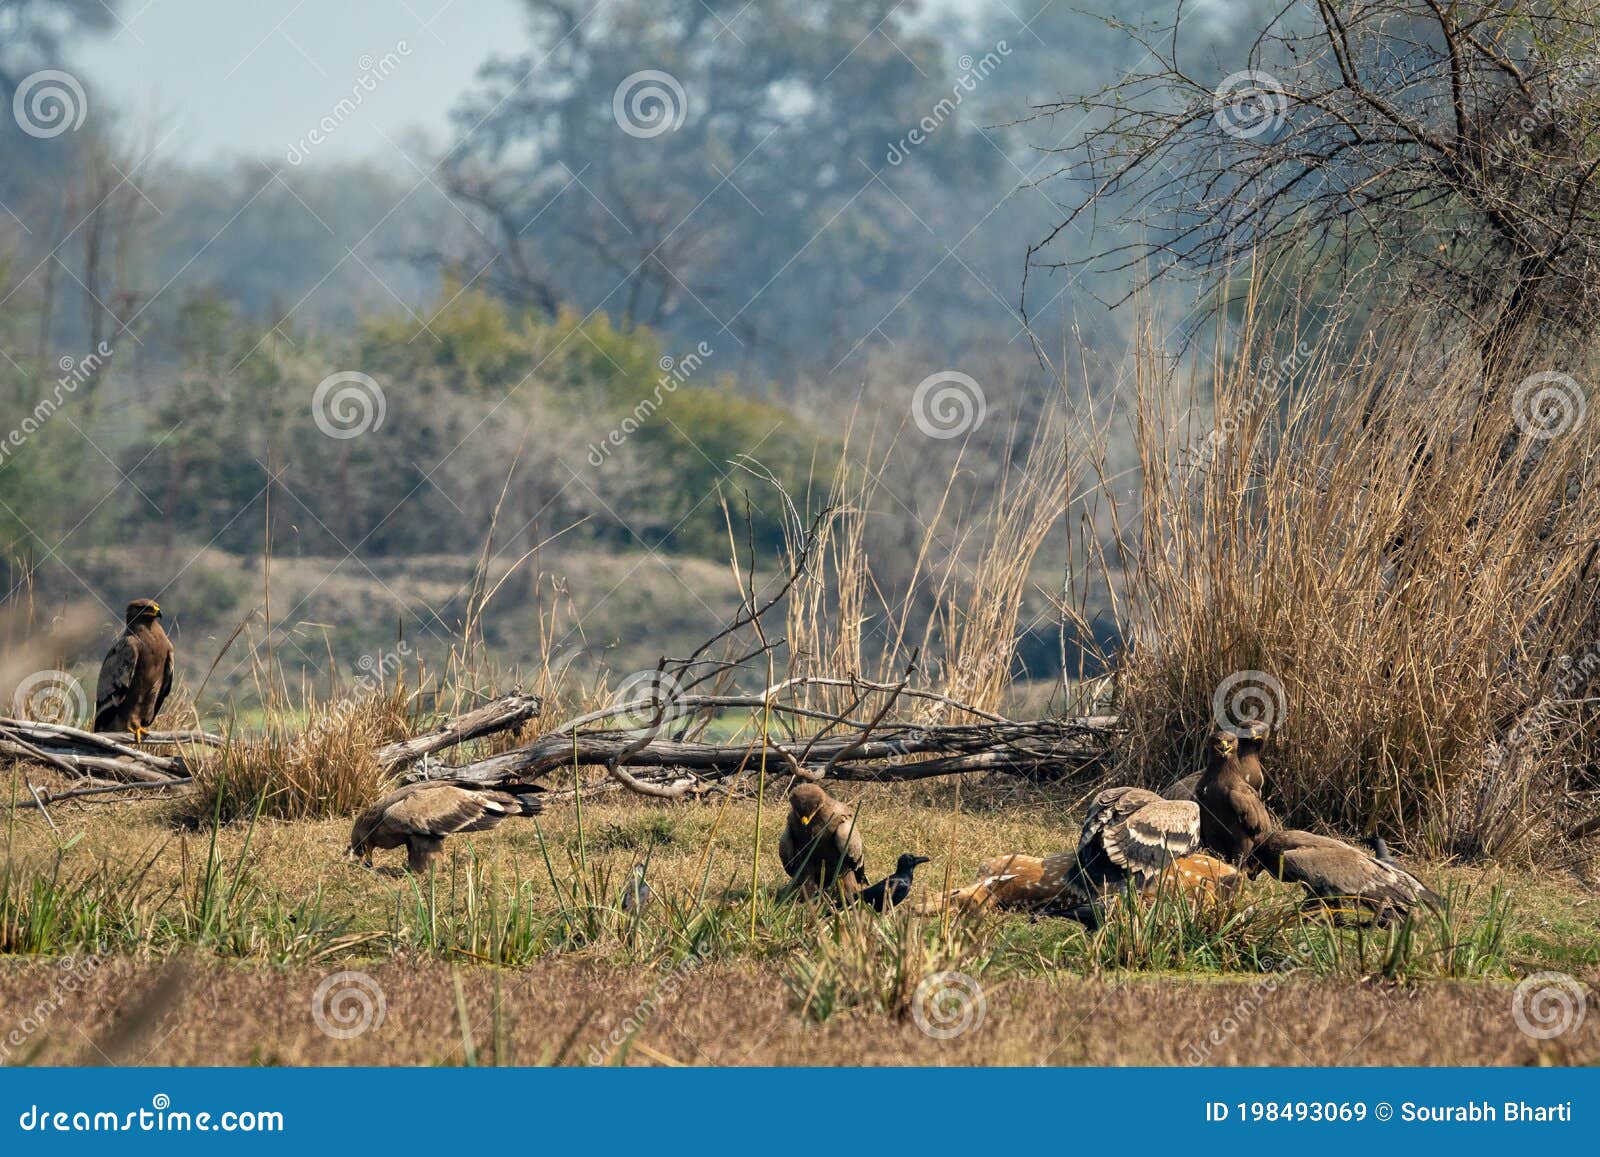 Steppe Eagle Flock Feeding on Spotted or Axis Deer Kill. Action Scene of  Group of Animals at Keoladeo Ghana National Park or Stock Image - Image of  chital, contact: 198493069